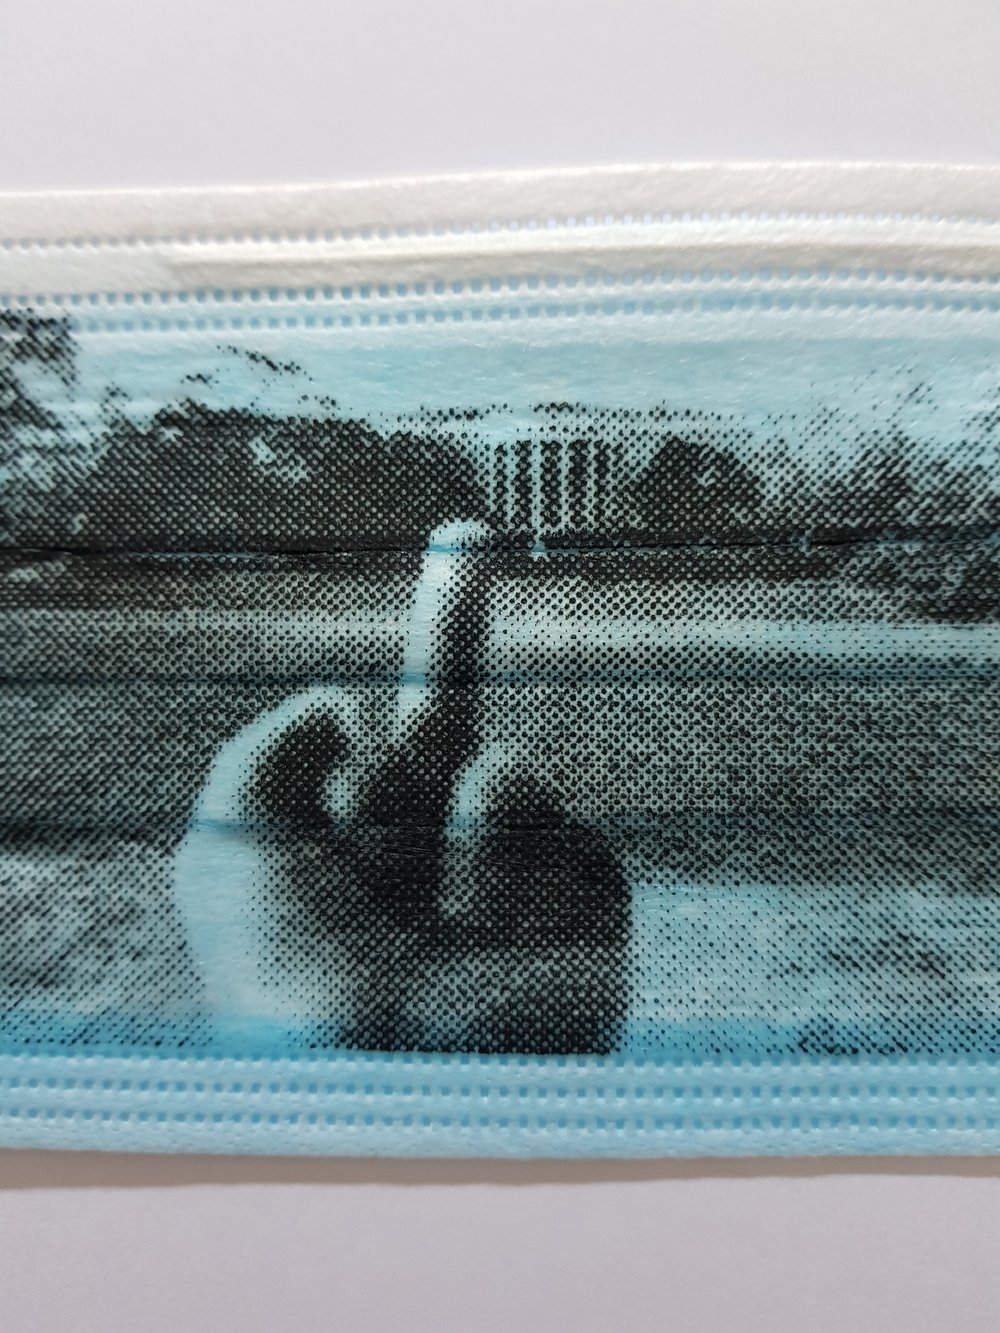 AI WEIWEI - "FINGER SERIES - THE WHITE HOUSE" LIMITED EDITION SILKSCREEN PRINTED MASK